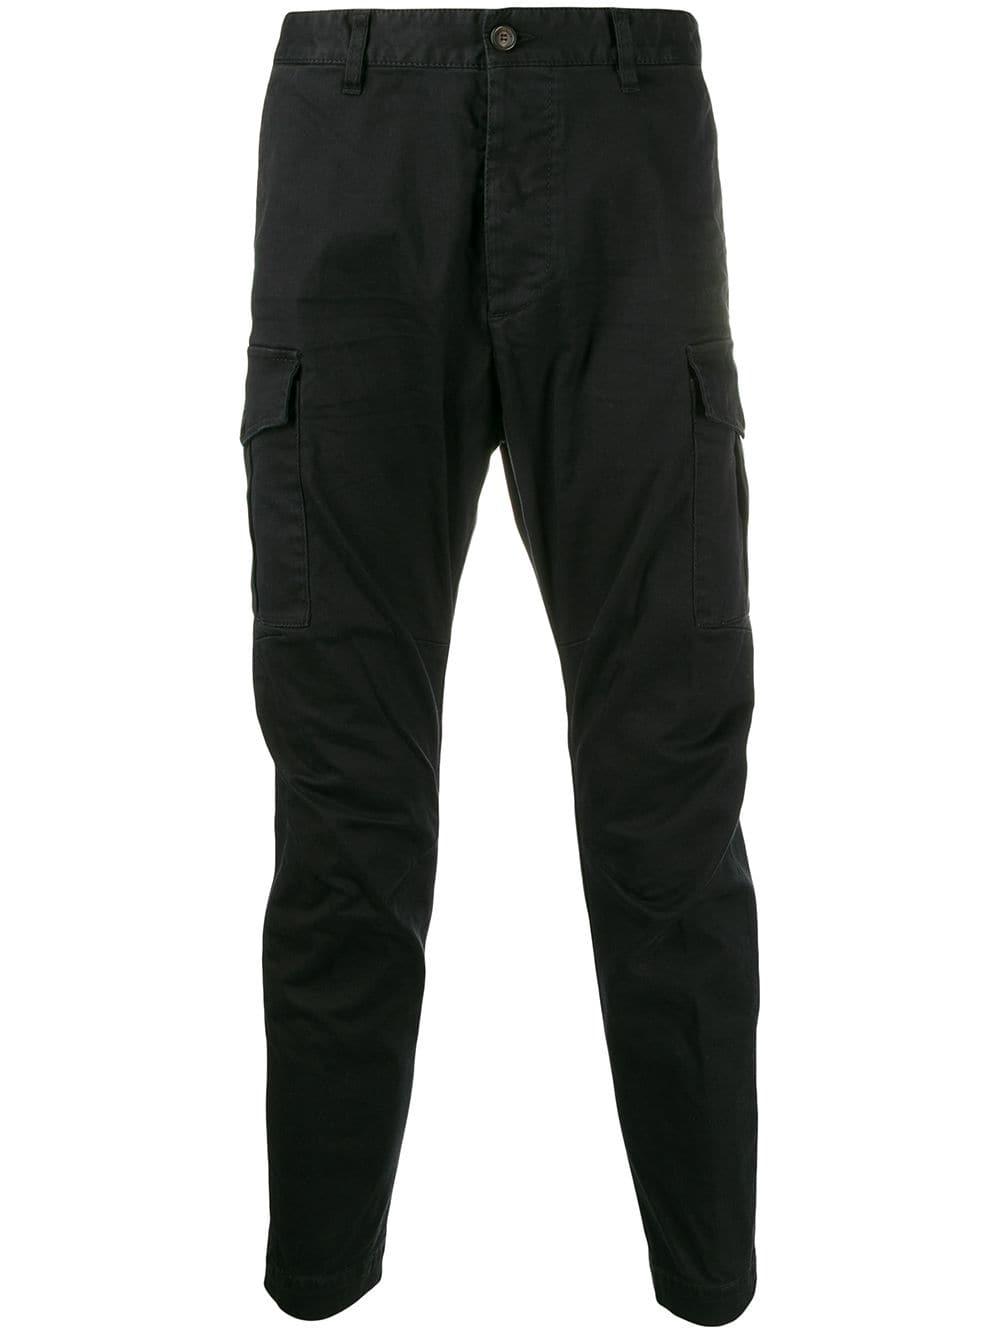 DSquared² Cotton Skinny Fit Cargo Pants in Black for Men - Lyst